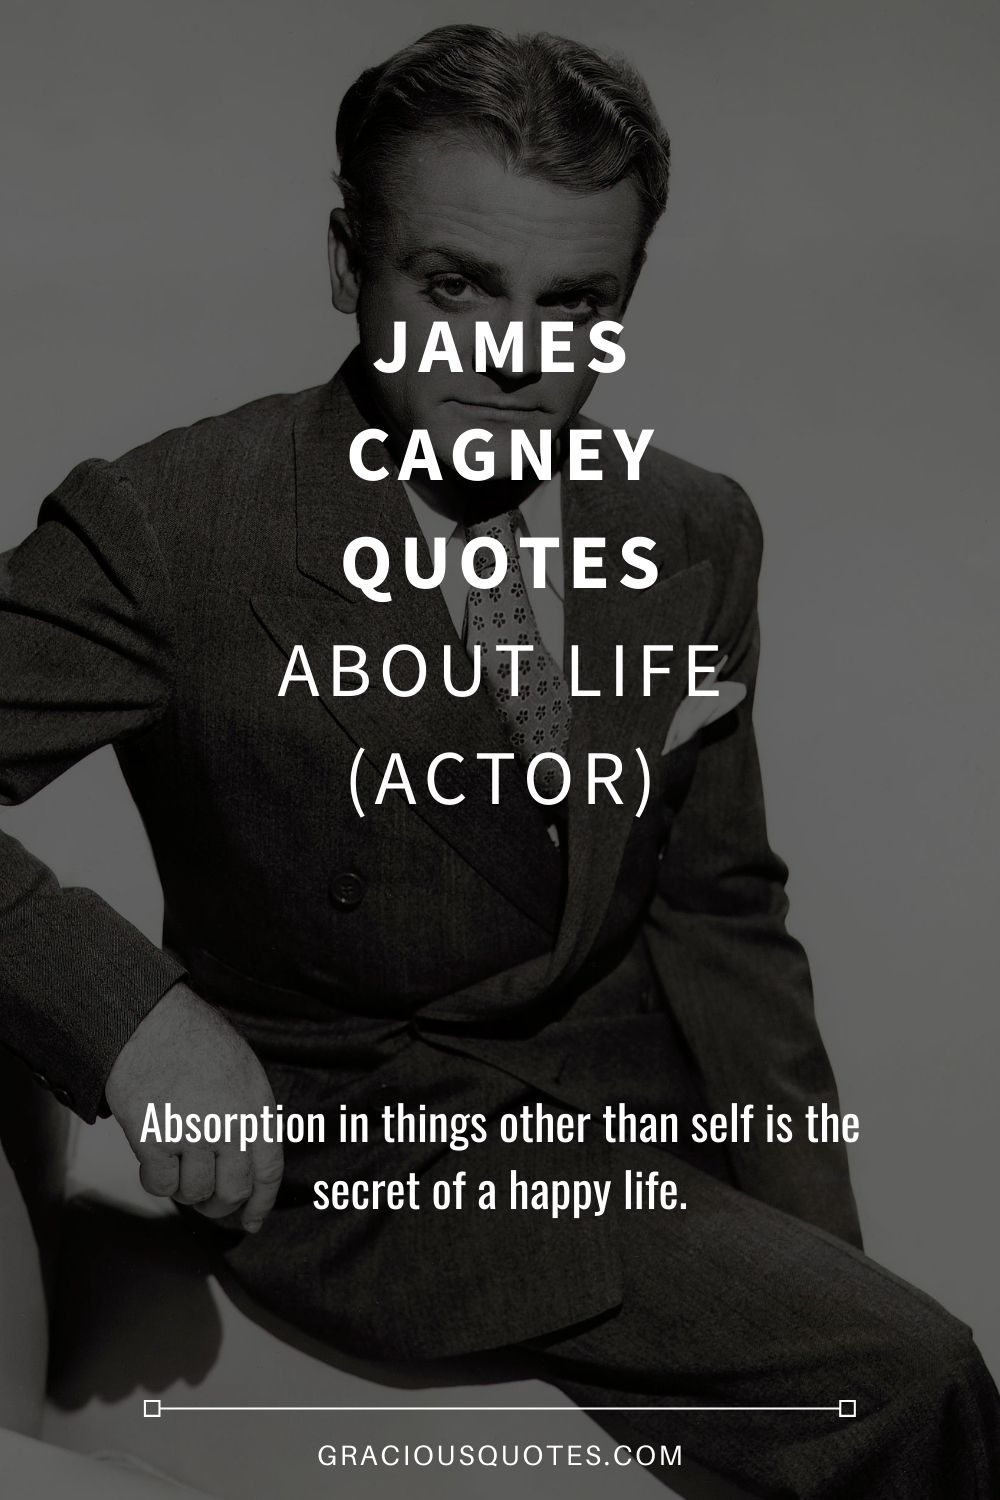 James Cagney Quotes About Life (ACTOR) - Gracious Quotes